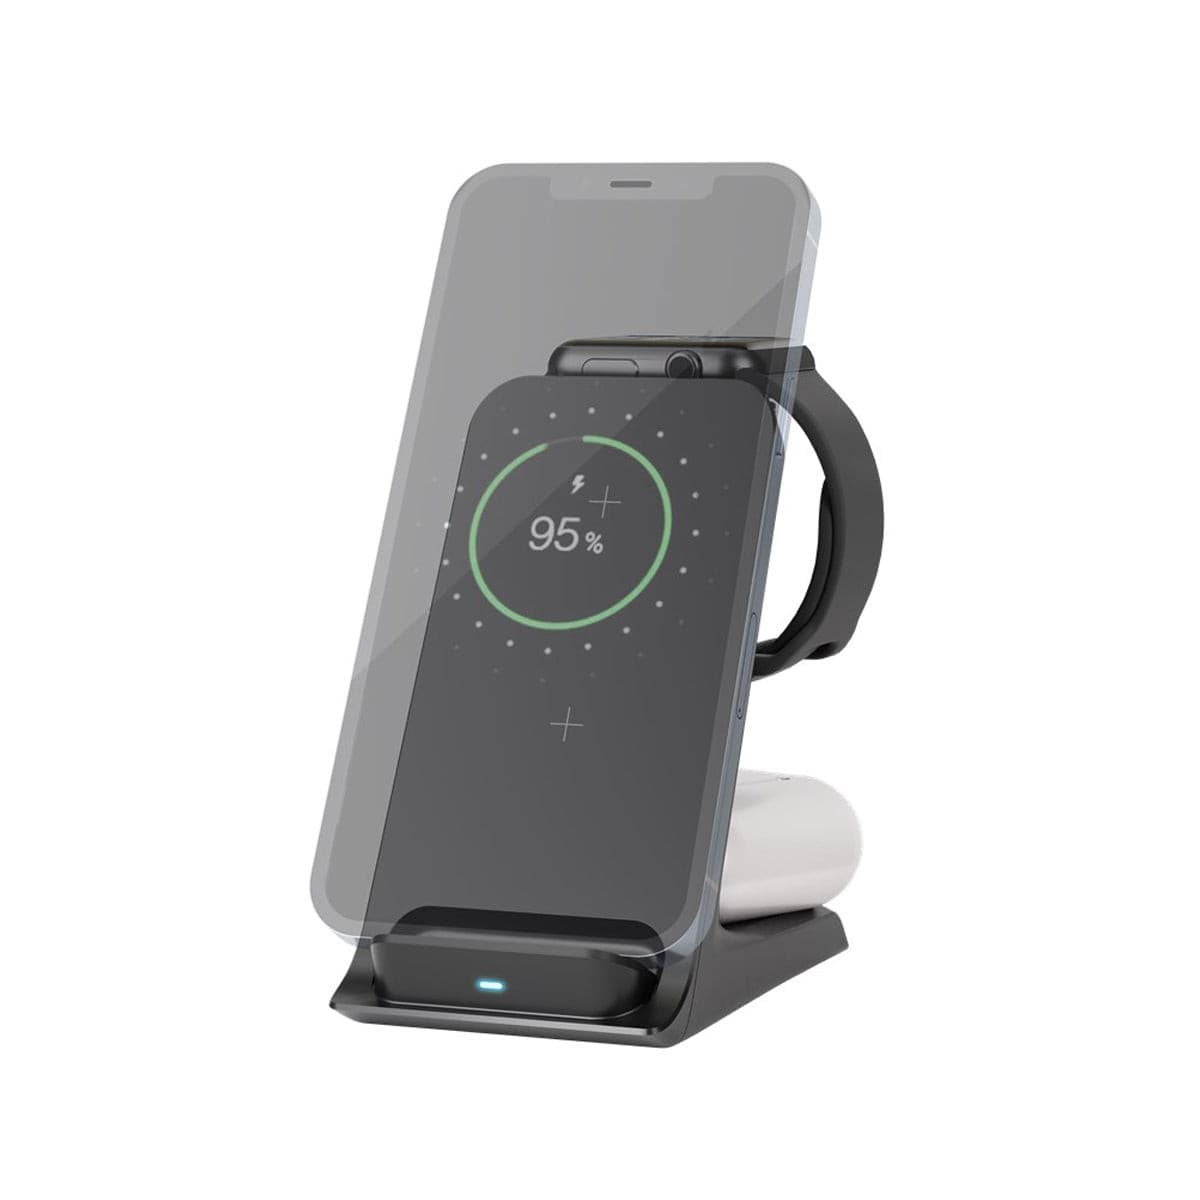 Goobay 3 in 1 Wireless Charger - Black.